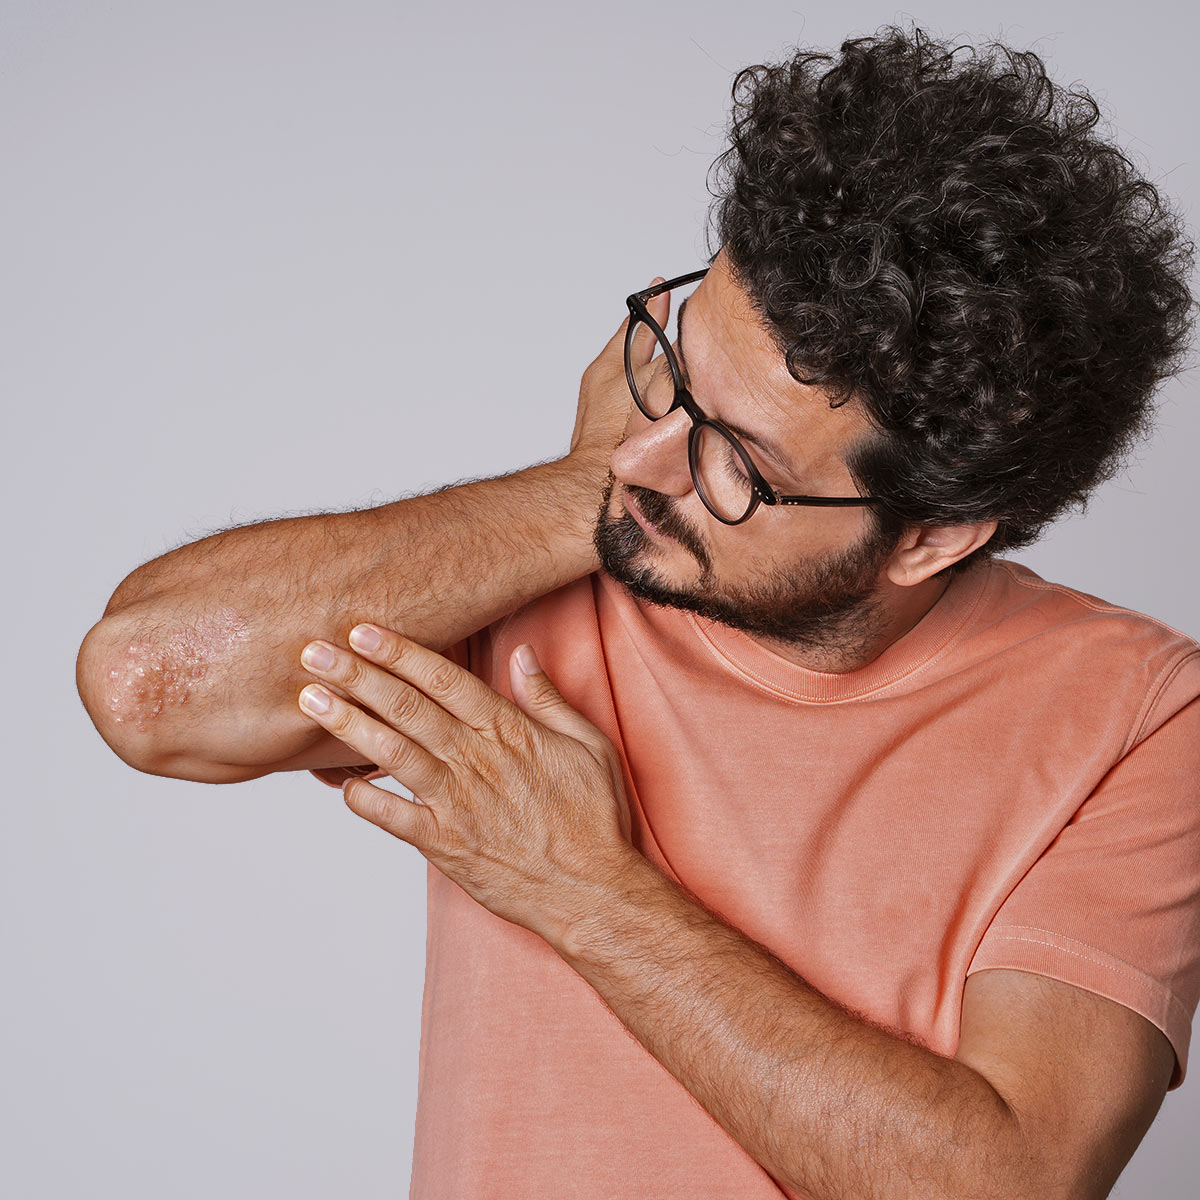 A young man with glasses and curly hair examines a patch of psoriasis on his elbow.